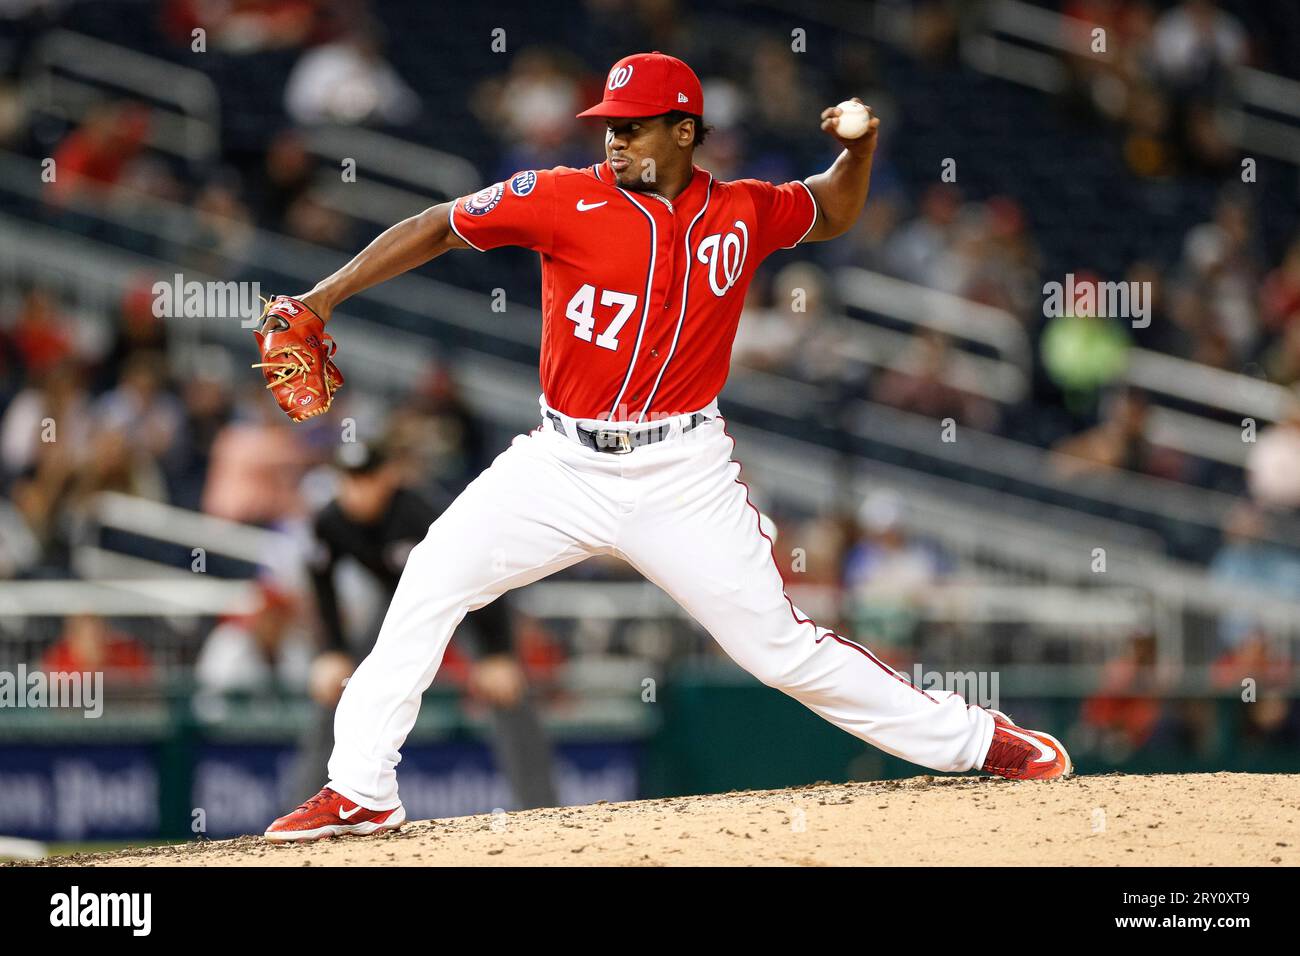 Washington Nationals relief pitcher Jose Ferrer (47) throws to the plate during game 2 of a double header between the Atlanta Braves and Washington Na Stock Photo